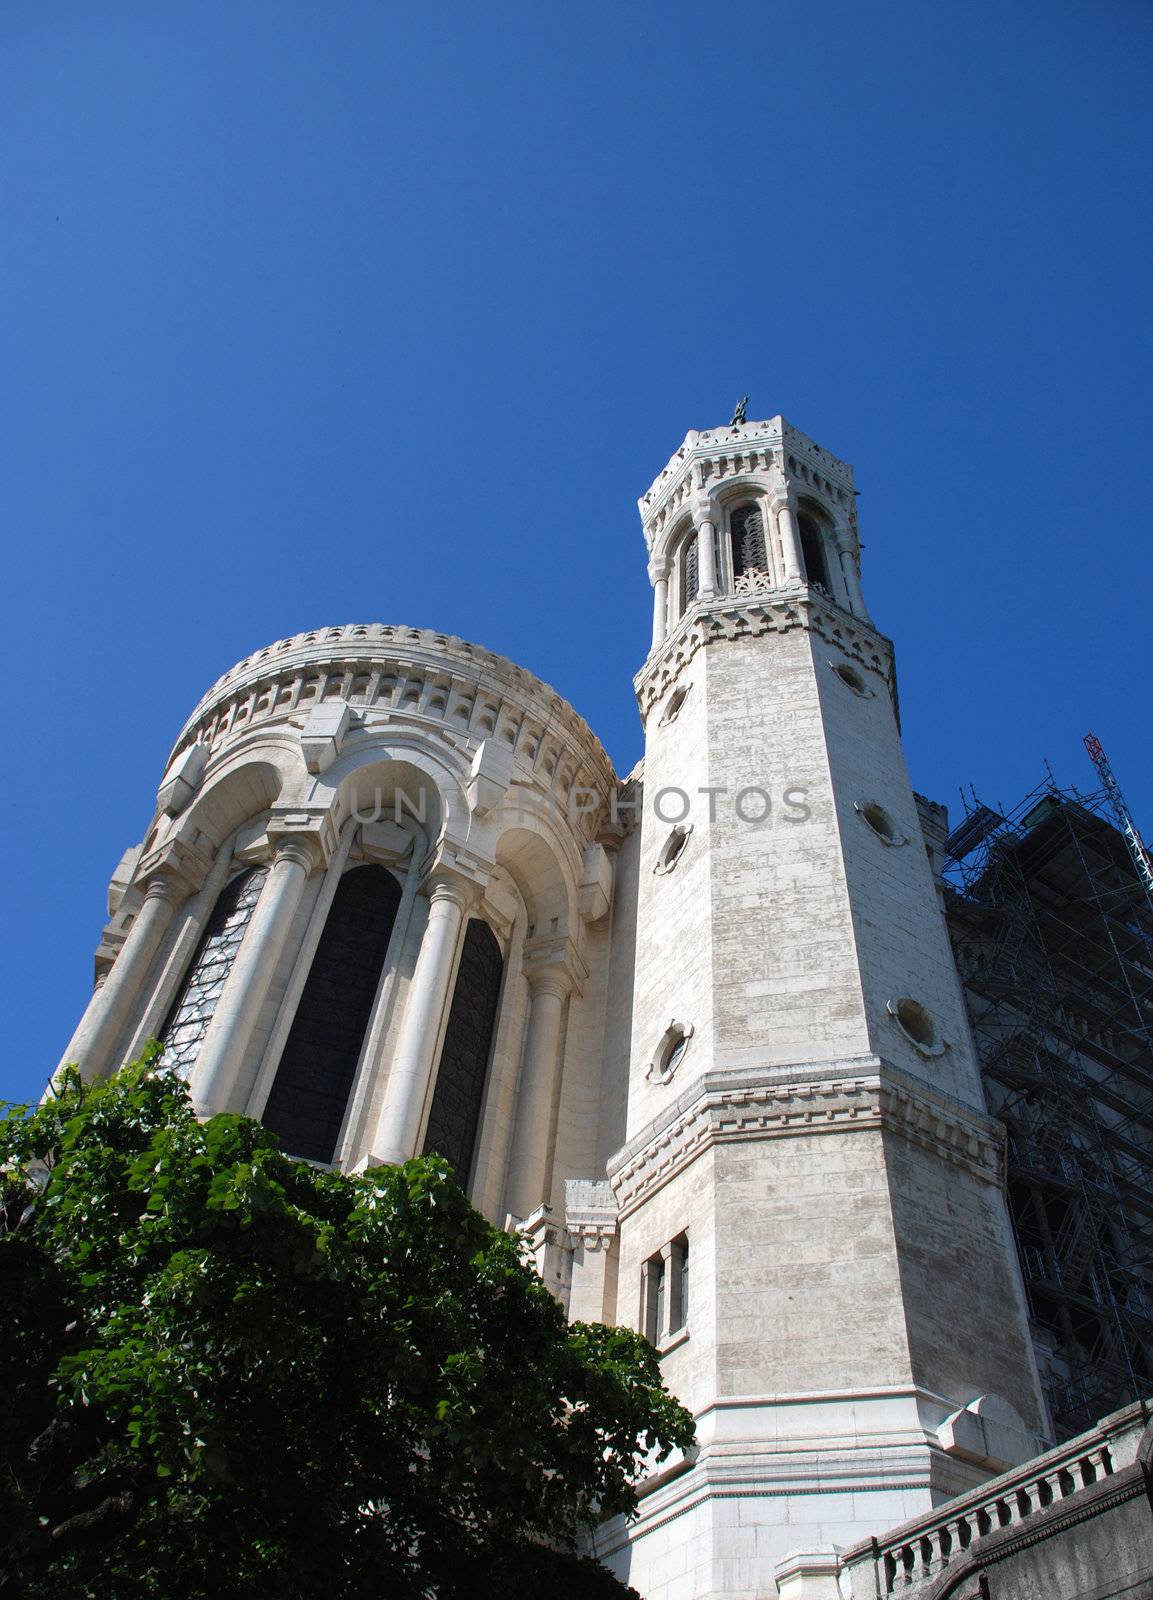 We can see this Basilic situated in Lyon, a big town in France, from the bottom . It is white,  old religious construction , with very specific detailes, wihth a baroque style.It forms part of the lyon's patrimony. In the background there is the blue sky.